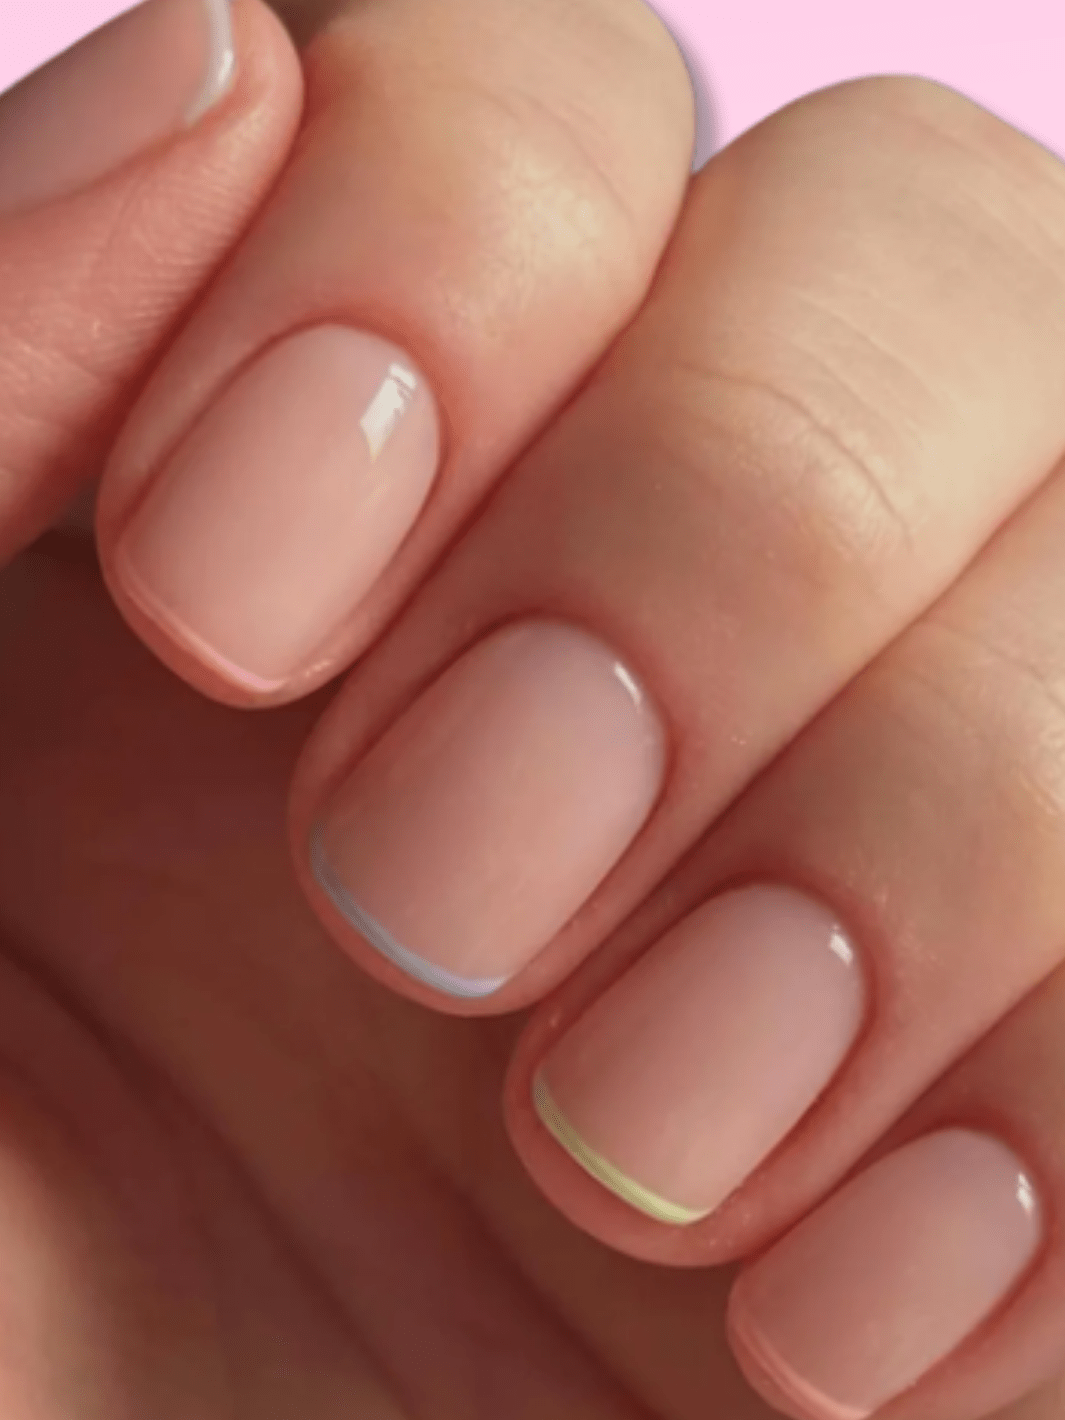 Faux ongle french court Nail Chic